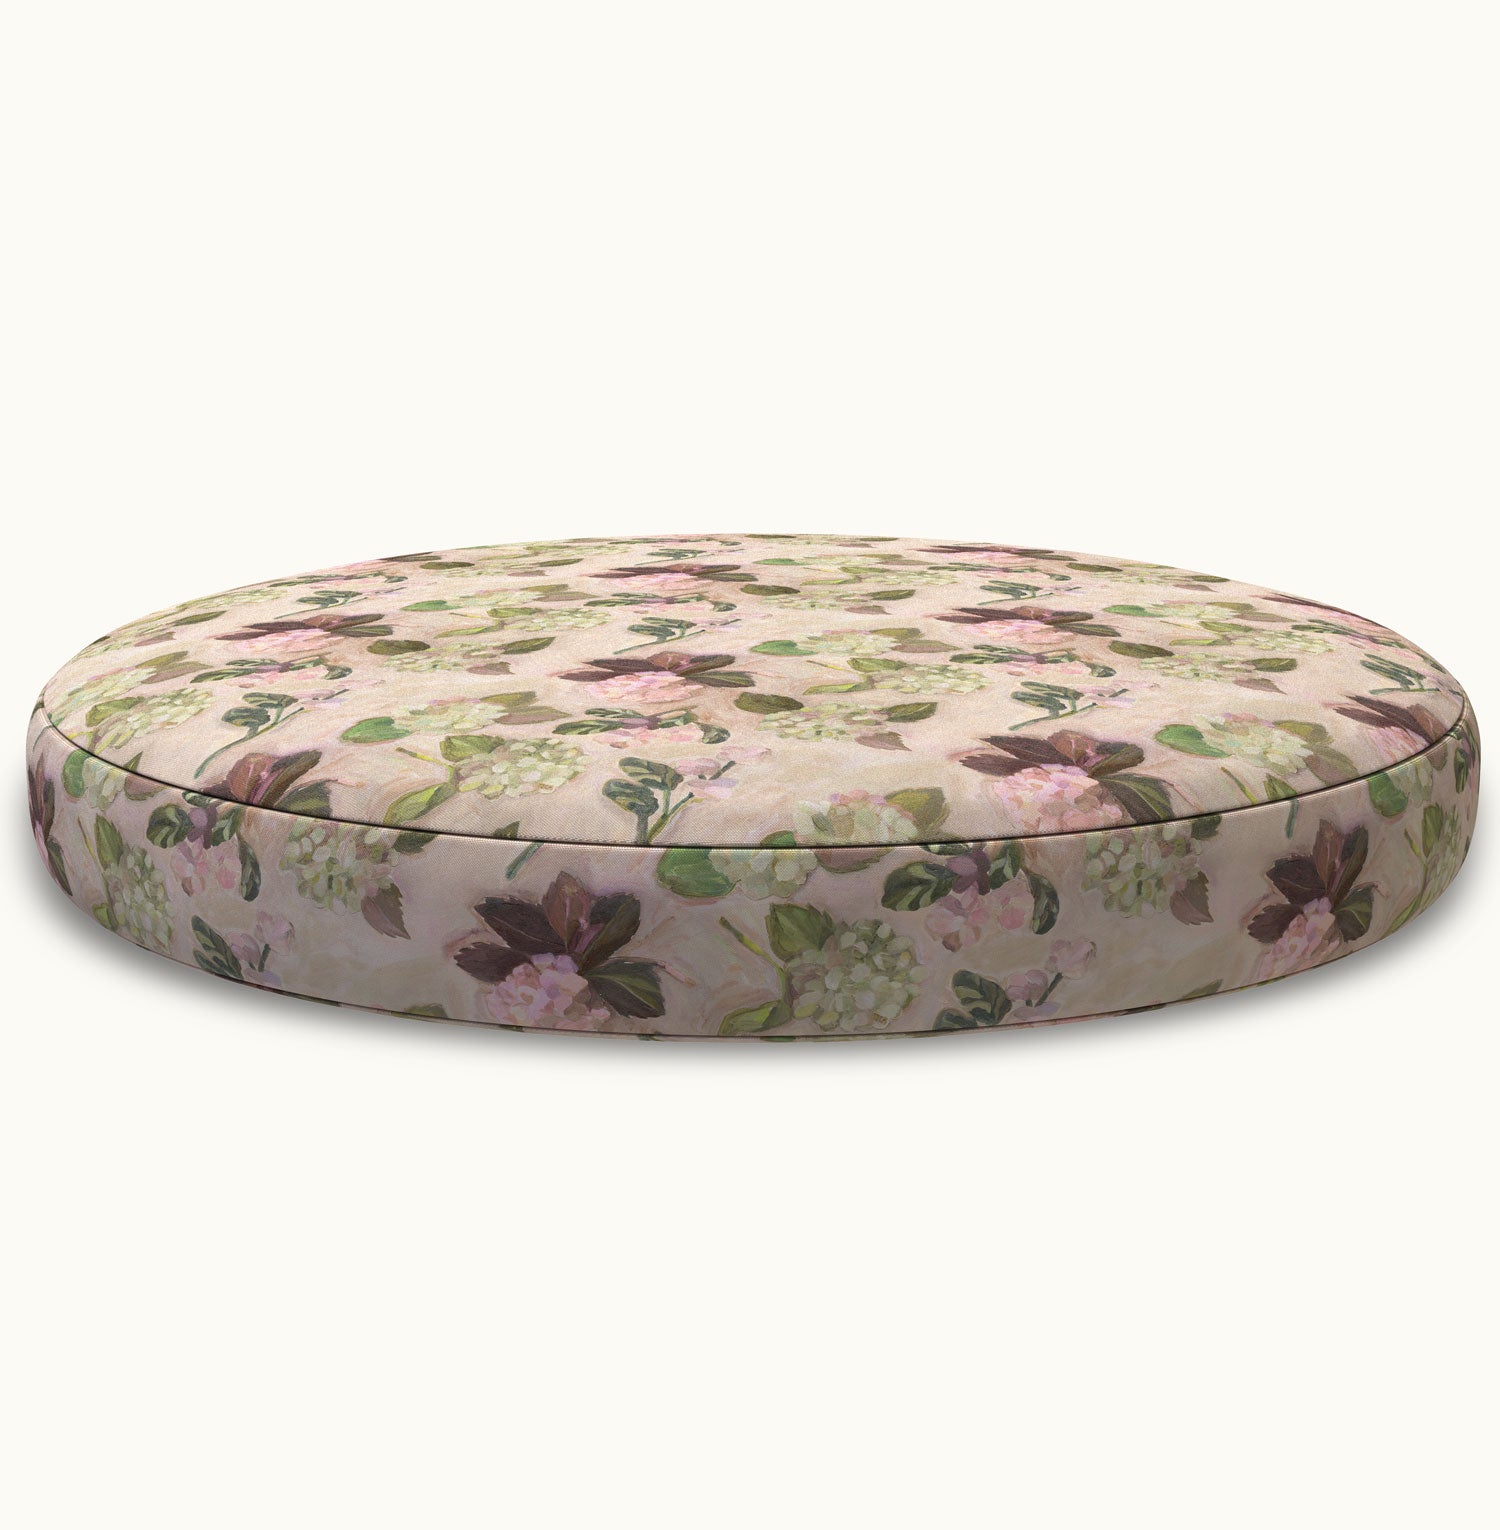 Test Floor Cushion with Delilah fabric